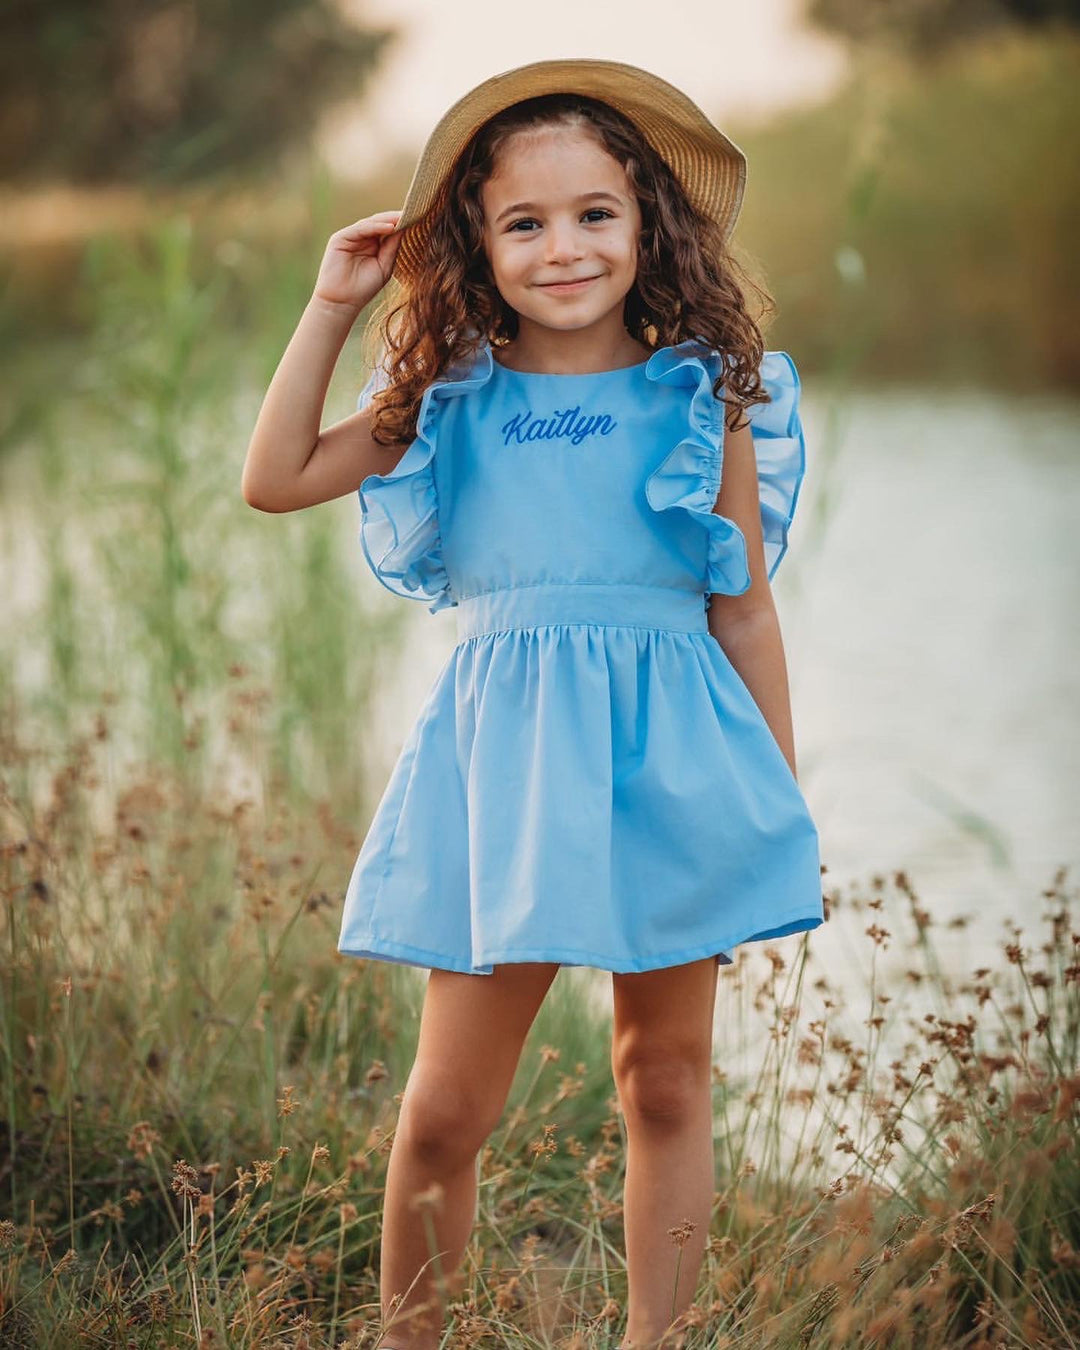 mace and co kids clothing dubai, open back dress in cotton fabric material, for girls from infant, toddler up to to seven years old, perfect for casual wear, parties and playtime, sky blue colour.